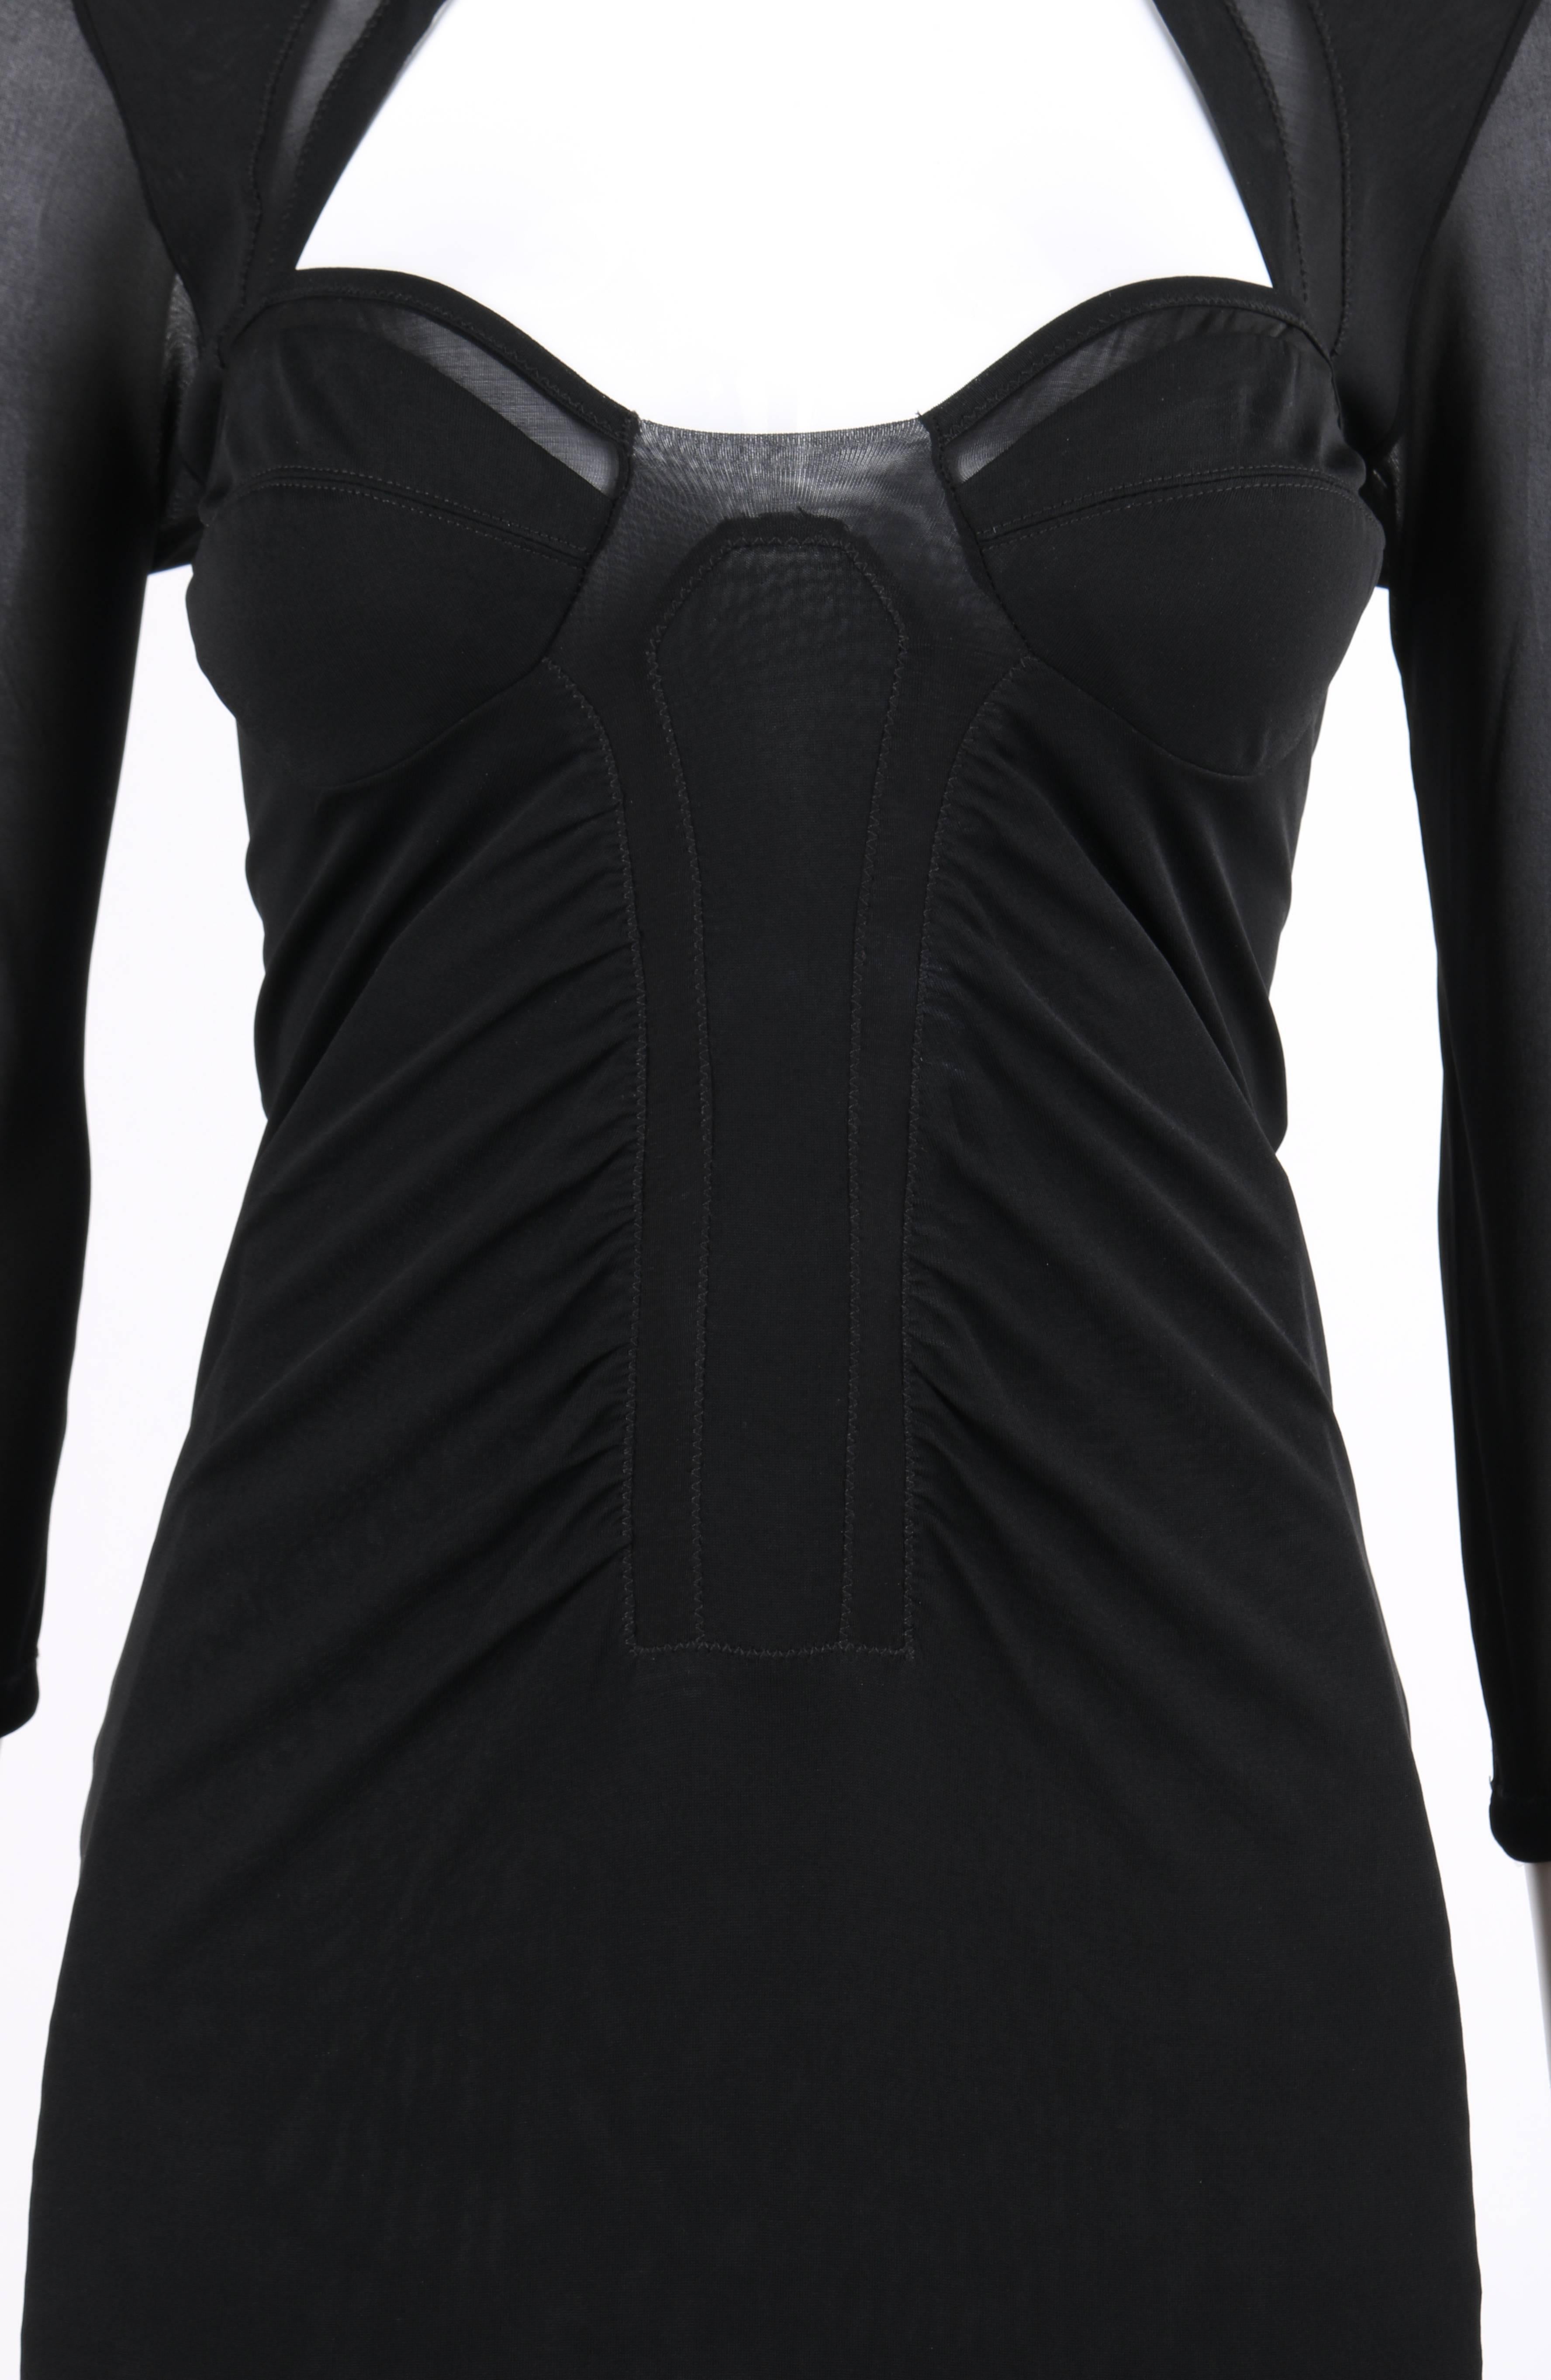 GUCCI S/S 2005 Black Knit 3/4 Sleeve Bustier Shift Cocktail Dress 1